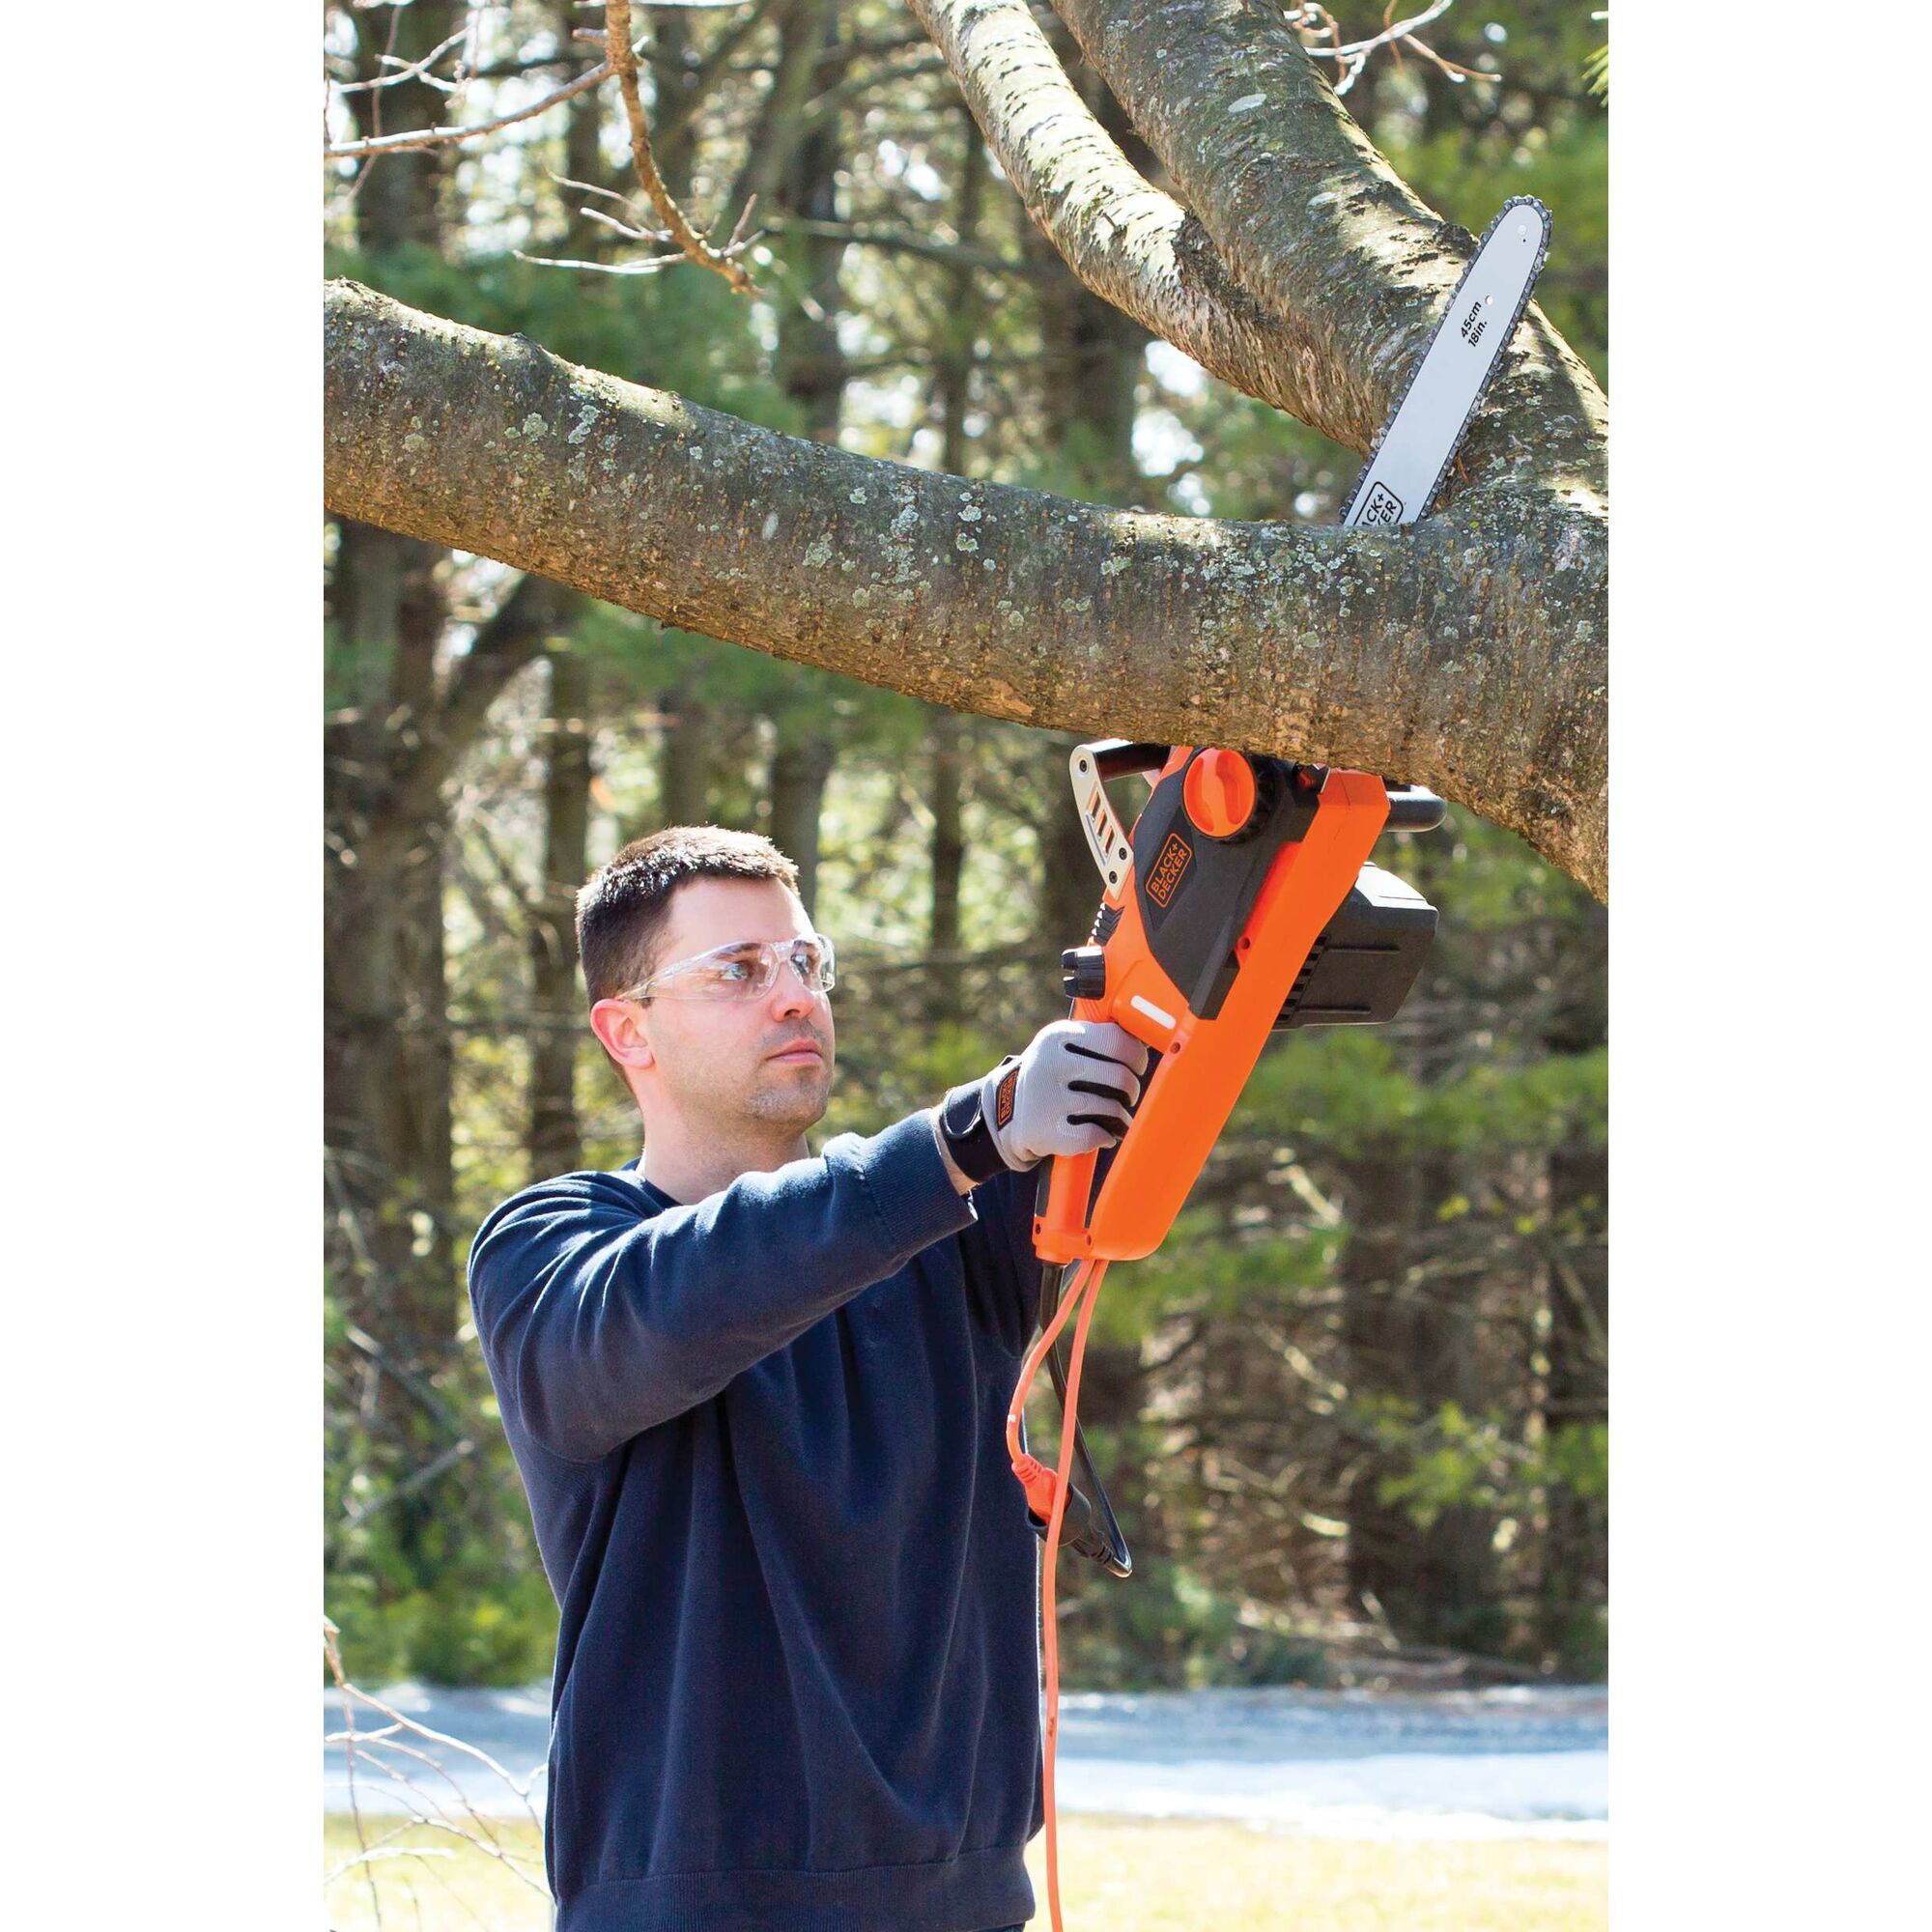 15 Amp 18 inch Chainsaw being used to cut thick tree branch.